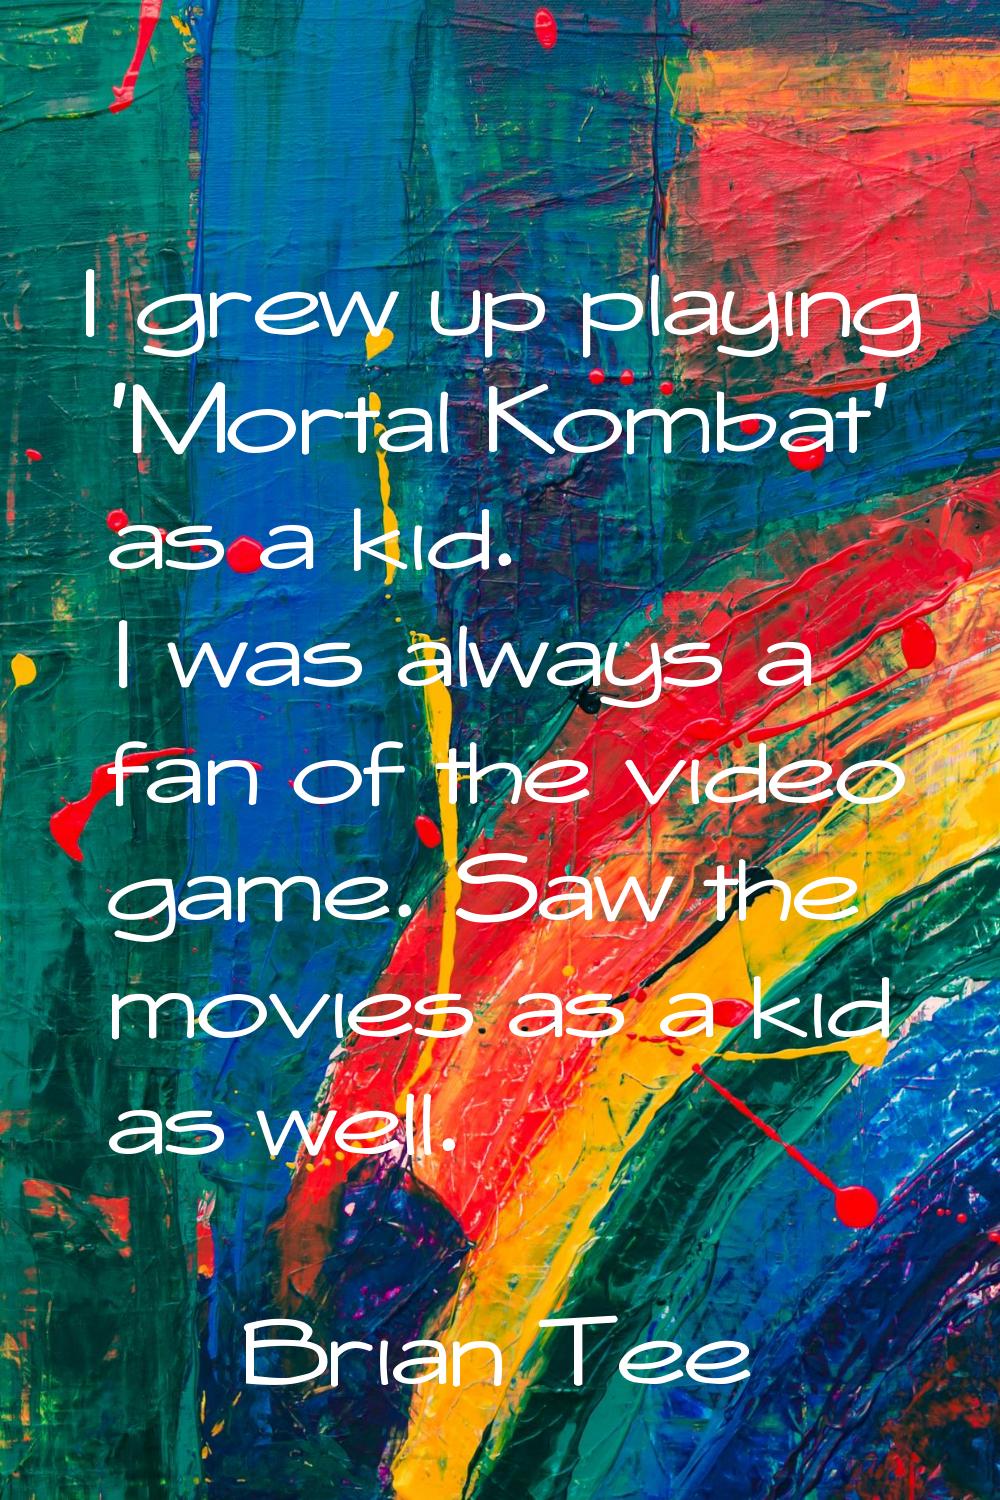 I grew up playing 'Mortal Kombat' as a kid. I was always a fan of the video game. Saw the movies as